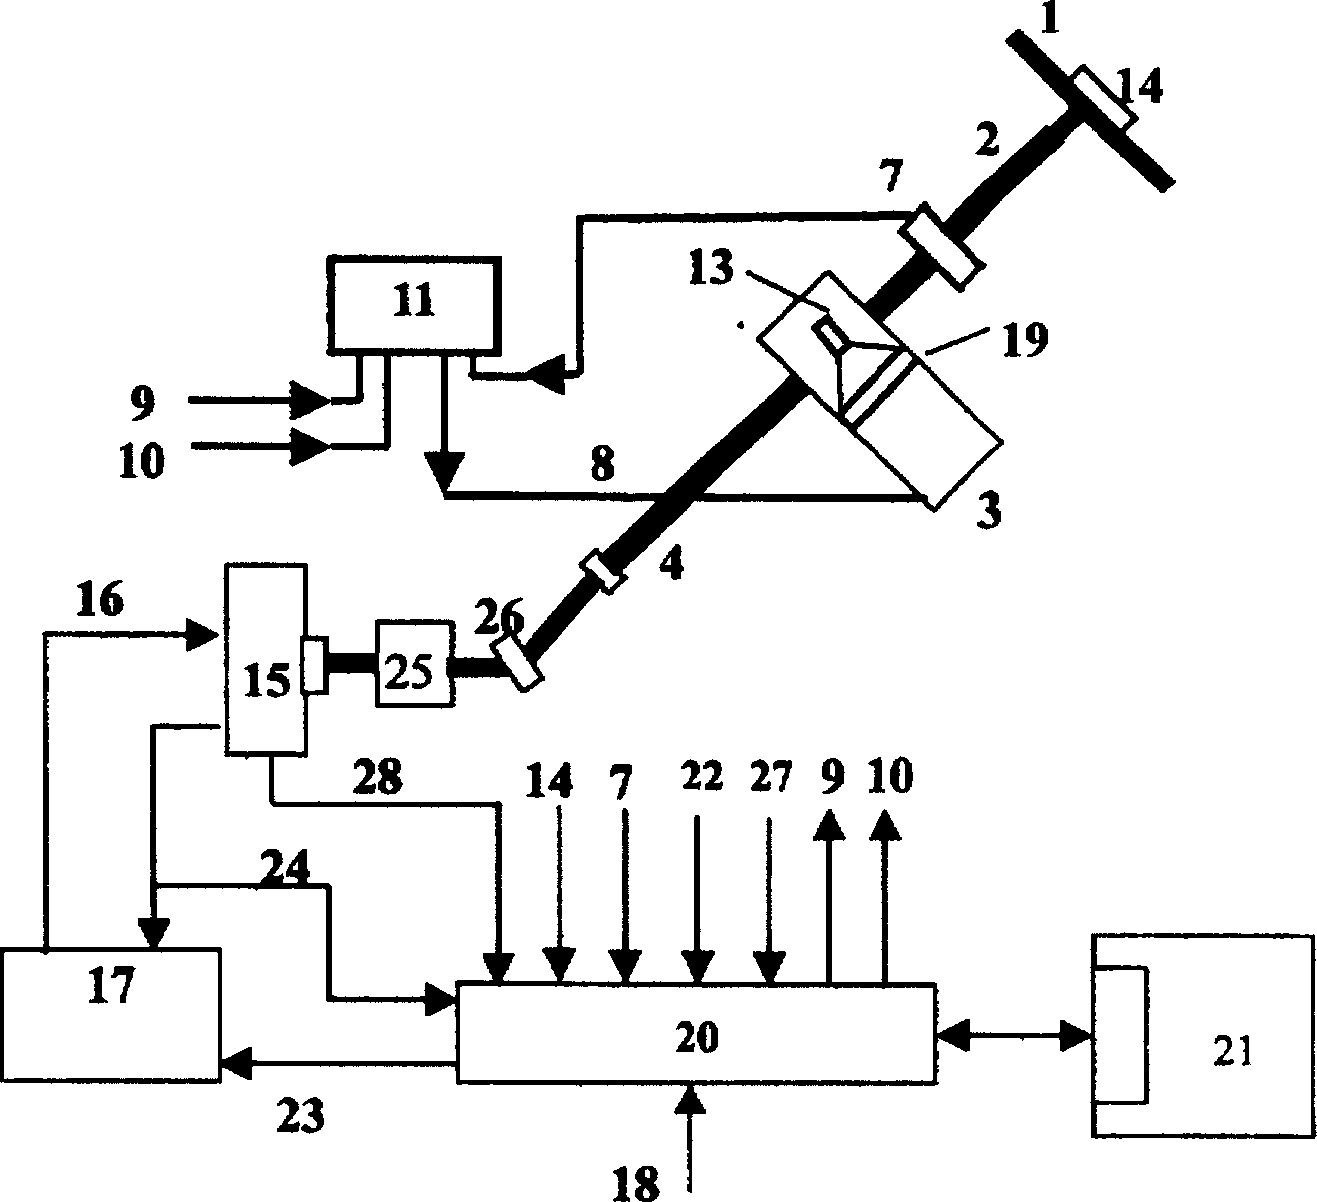 Automobile electric power-assisted steering system simulation testing arrangement